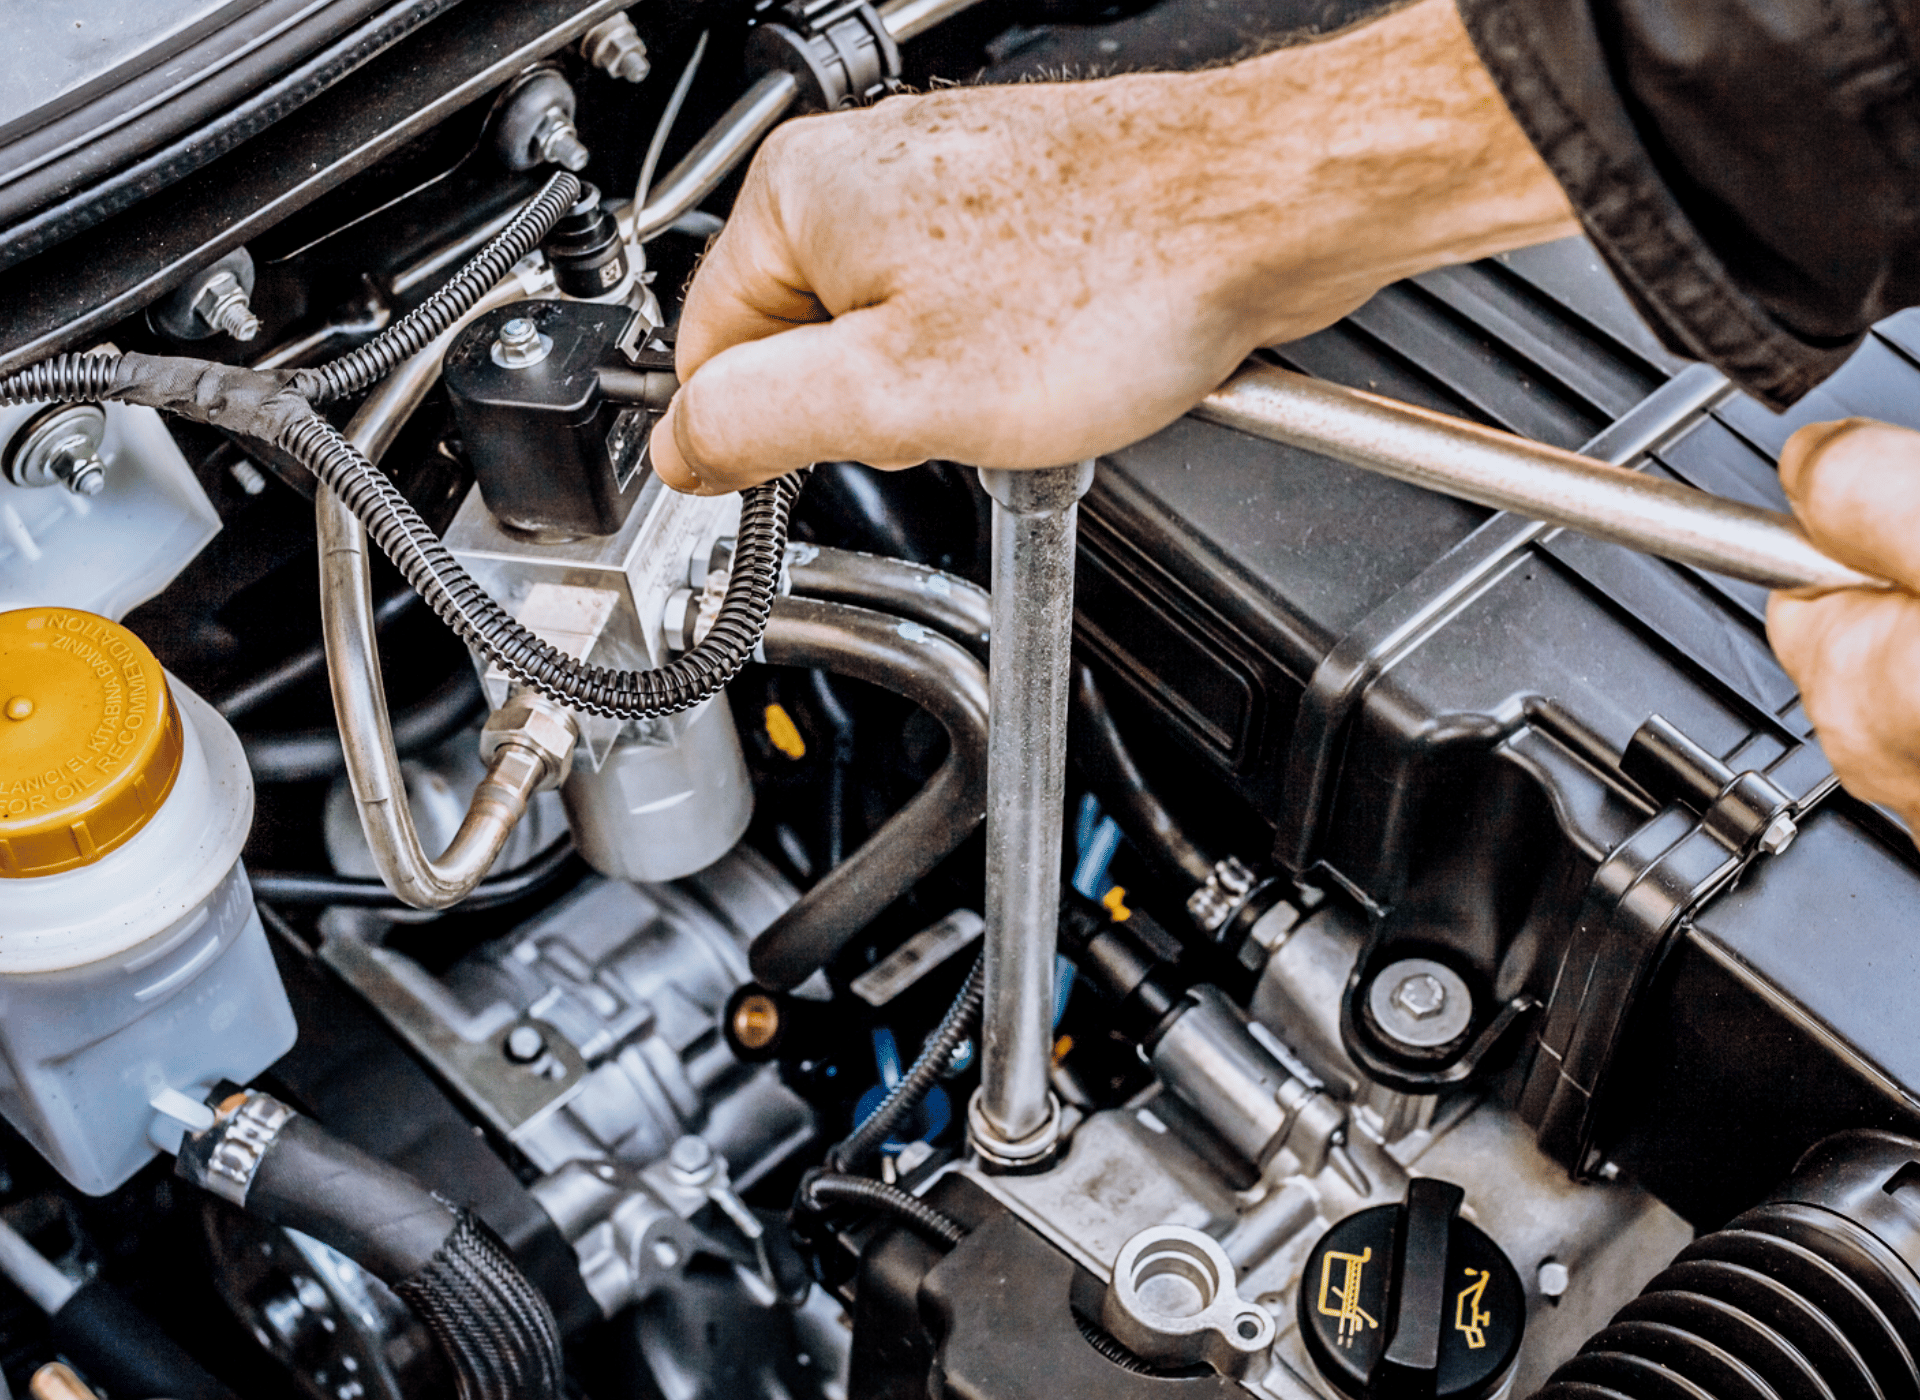 Image of an auto mechanic's ahnd holding a tool and working on an engine. Concept image of auto repair and maintenance at Independent Auto and Diesel Repair.